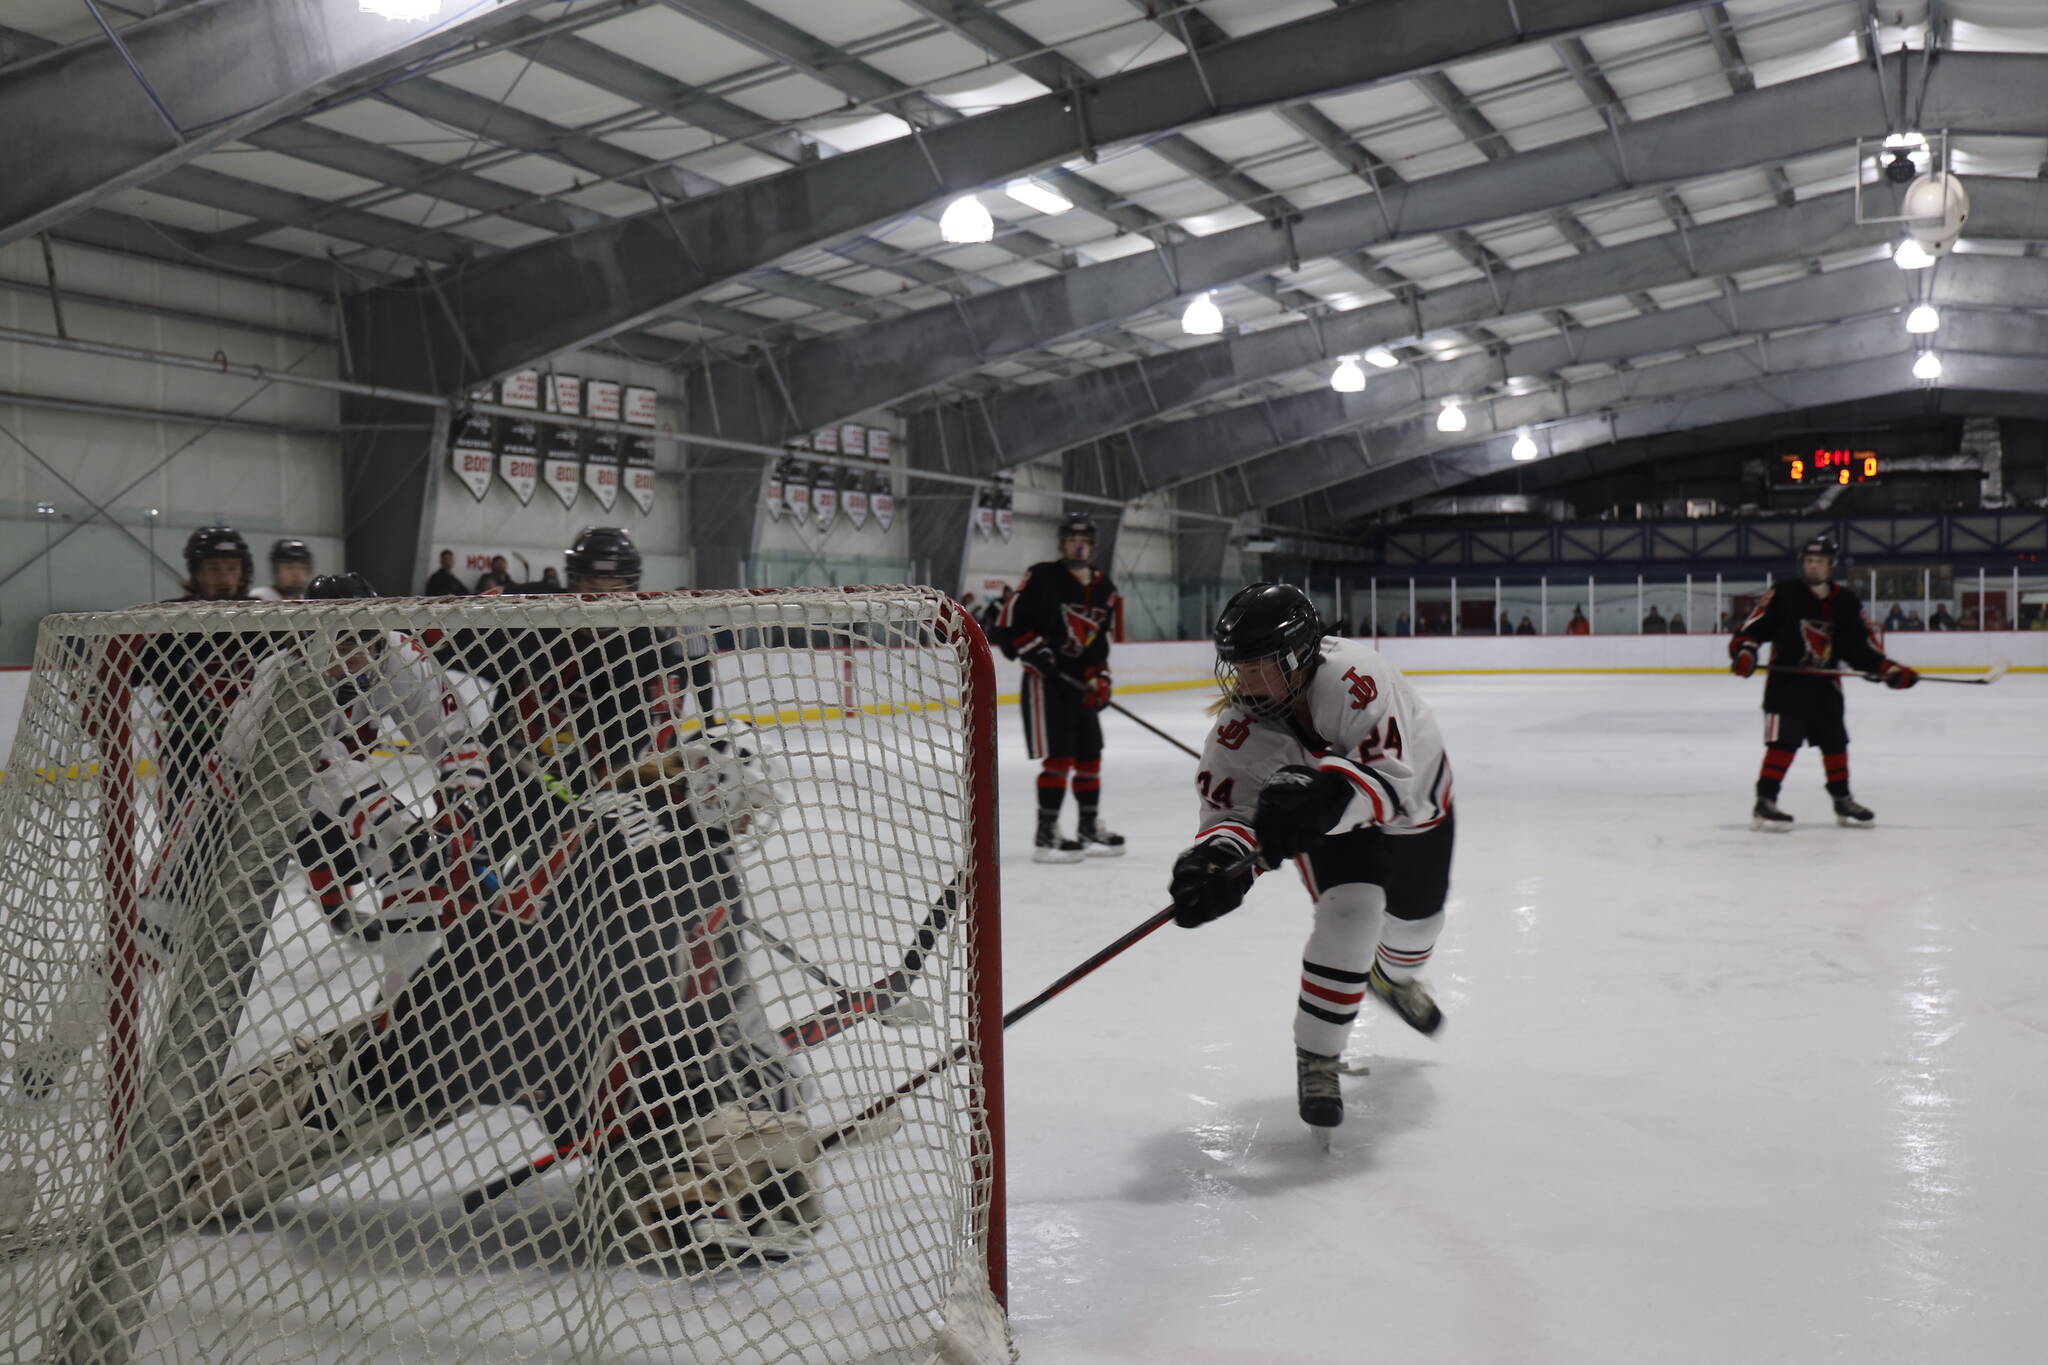 Senior Anna Dale attempts to stuff the net during a home game between Juneau-Douglas High School: Yadaa.at Kalé Crimson Bears Varsity hockey team and the Kenai Central Kardinals at the Treadwell Arena Saturday afternoon. (Clarise Larson / Juneau Empire)